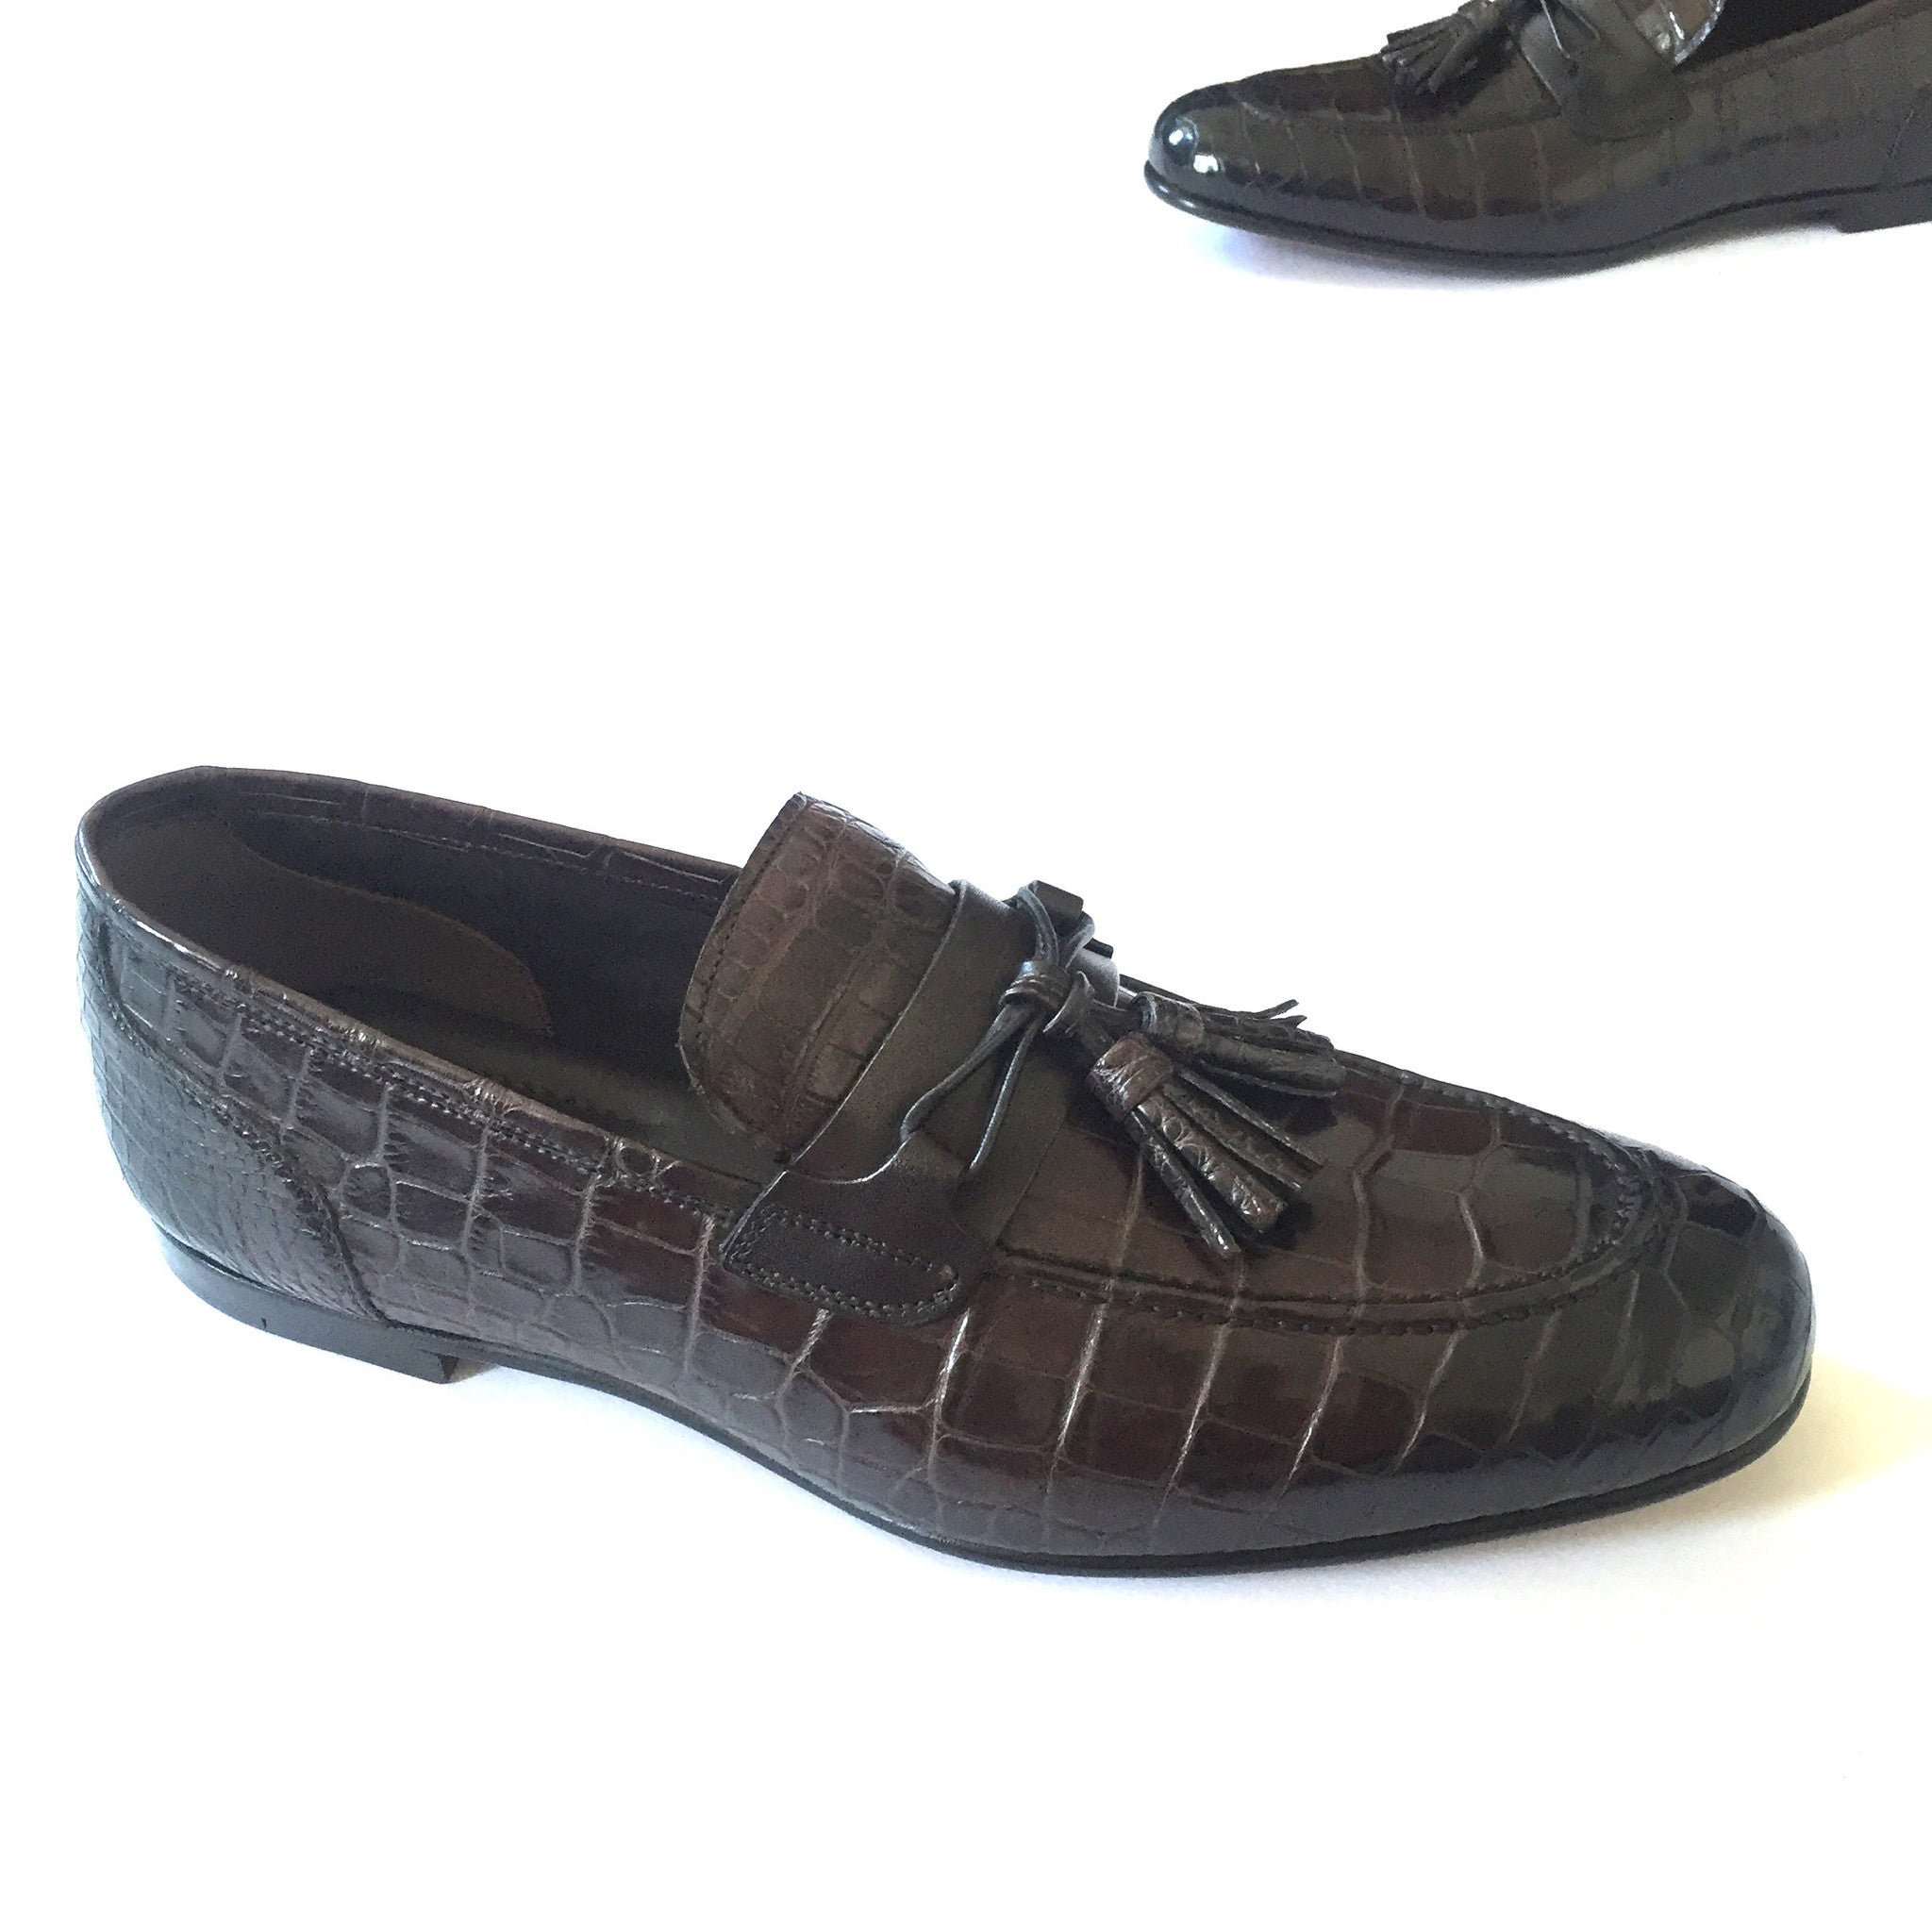 tom ford crocodile shoes price